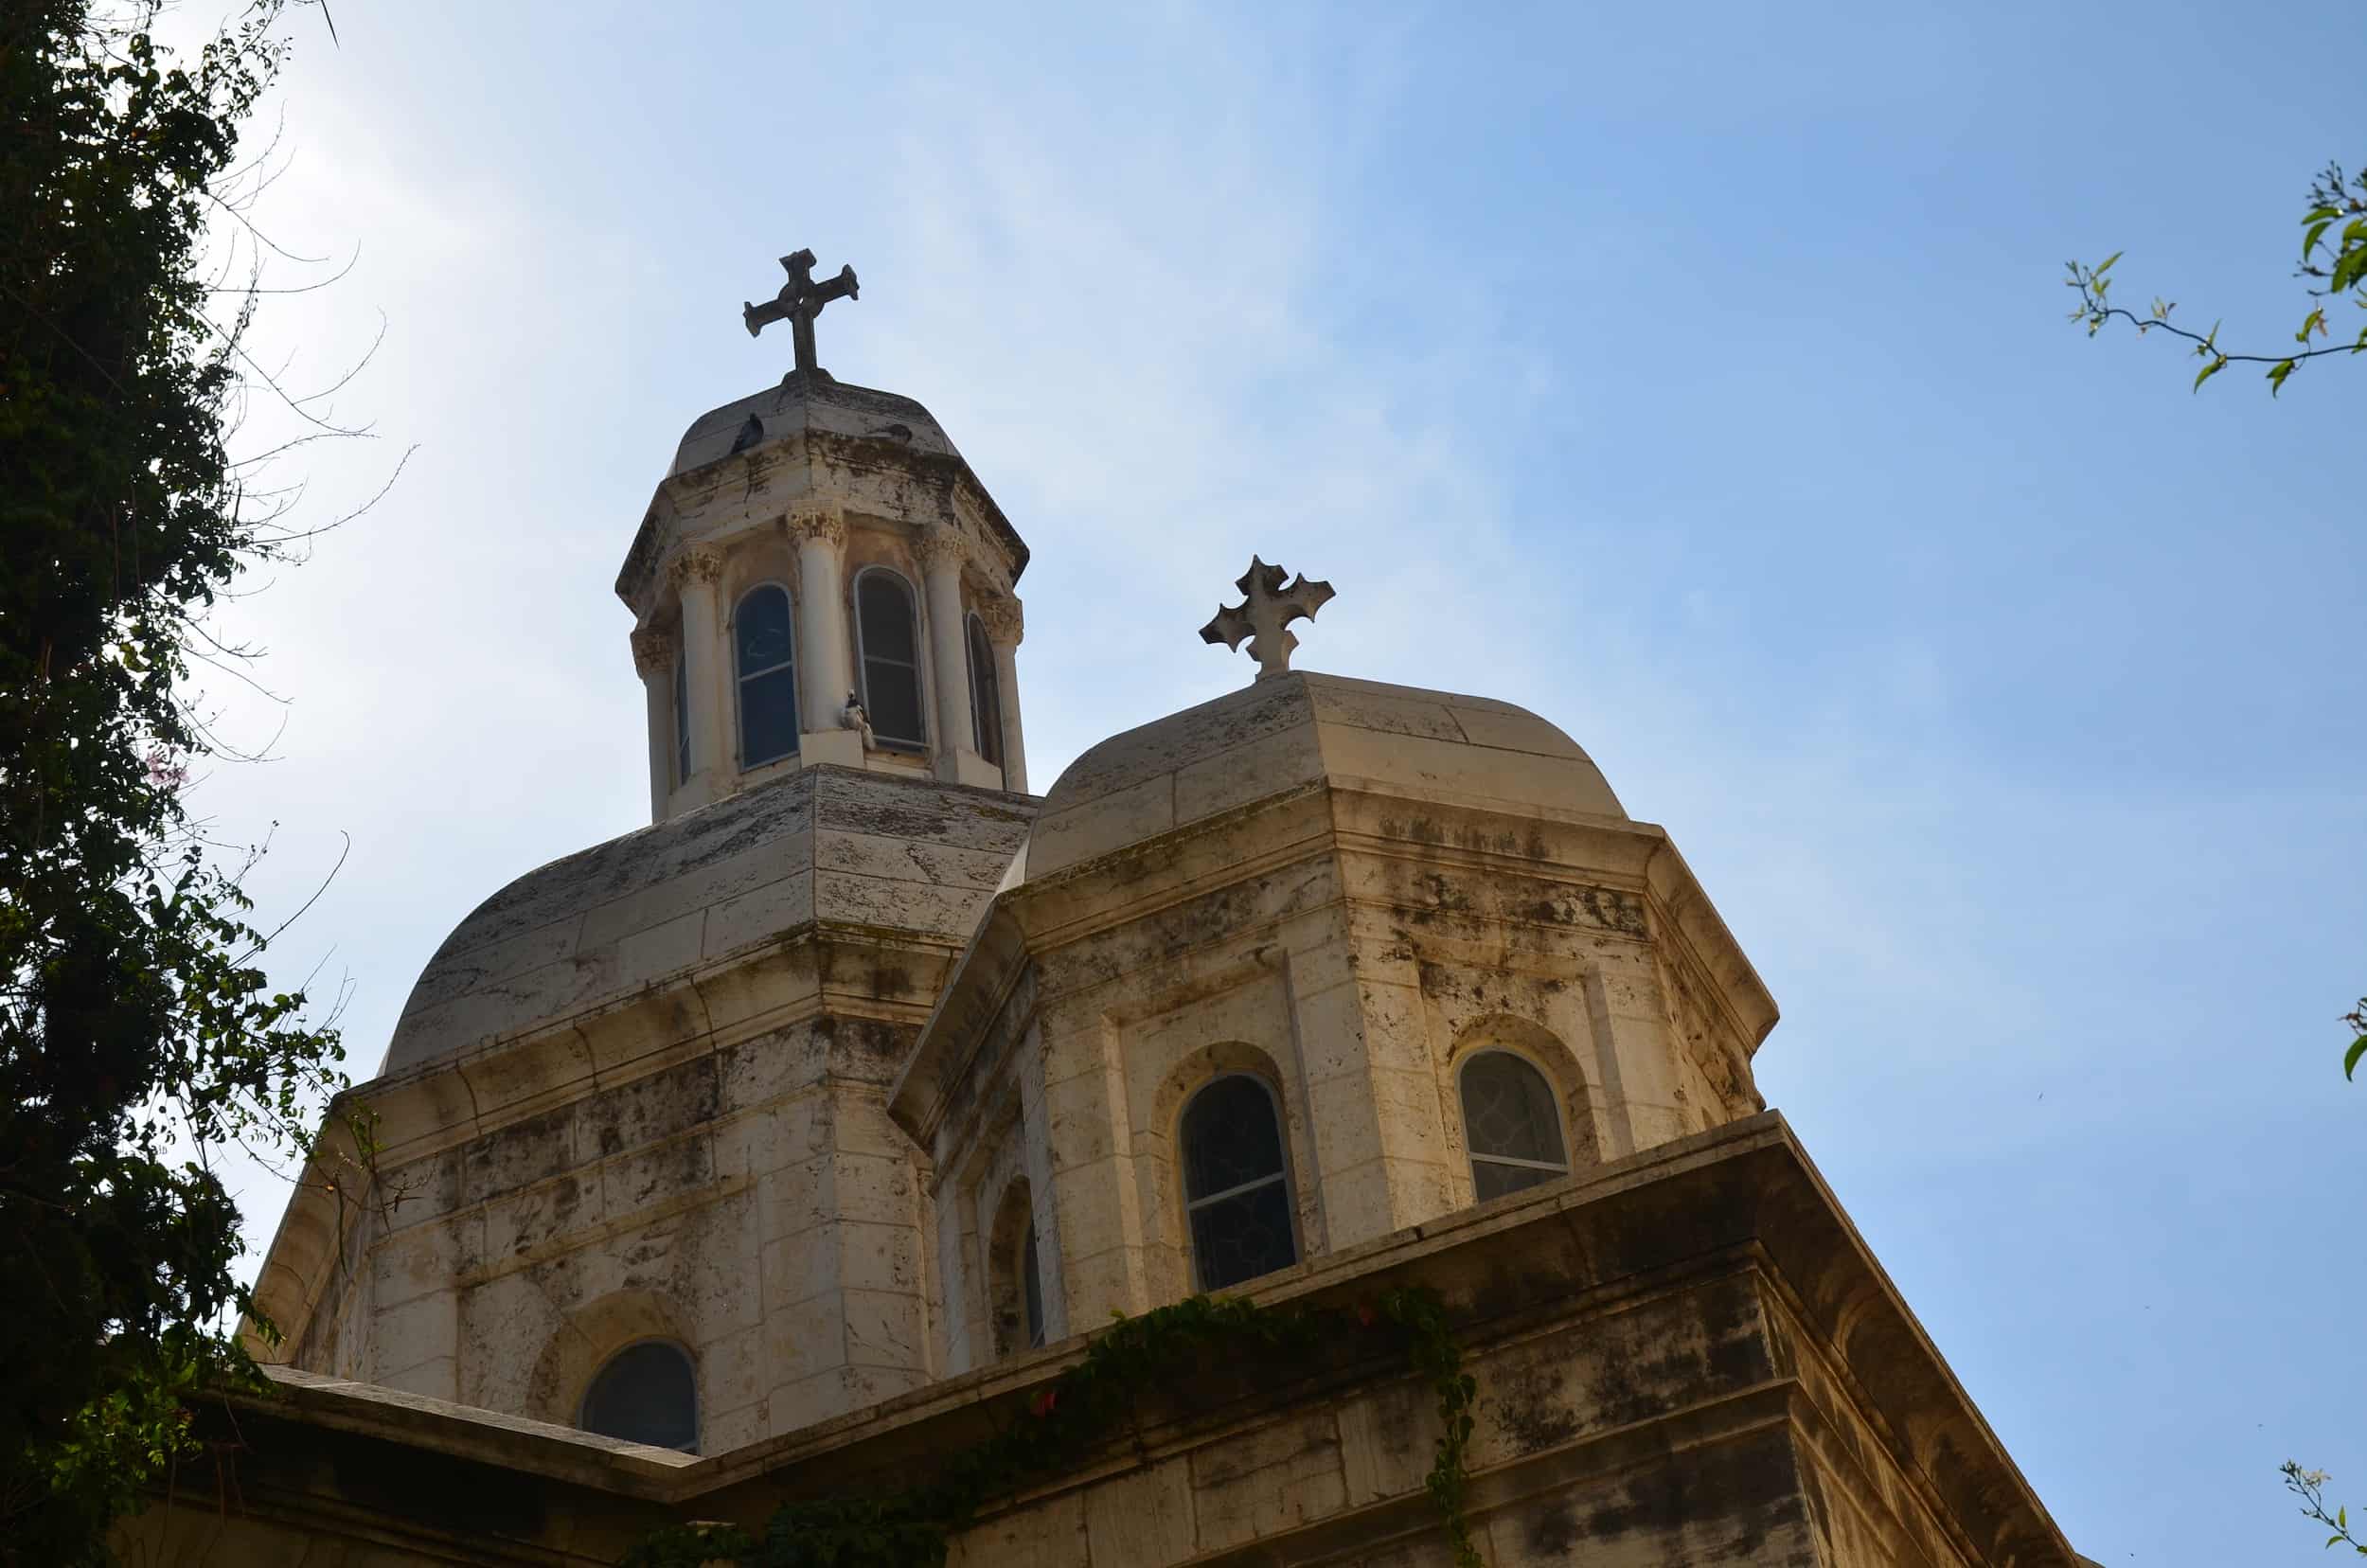 Domes of the Church of the Condemnation at the Monastery of the Flagellation in Jerusalem